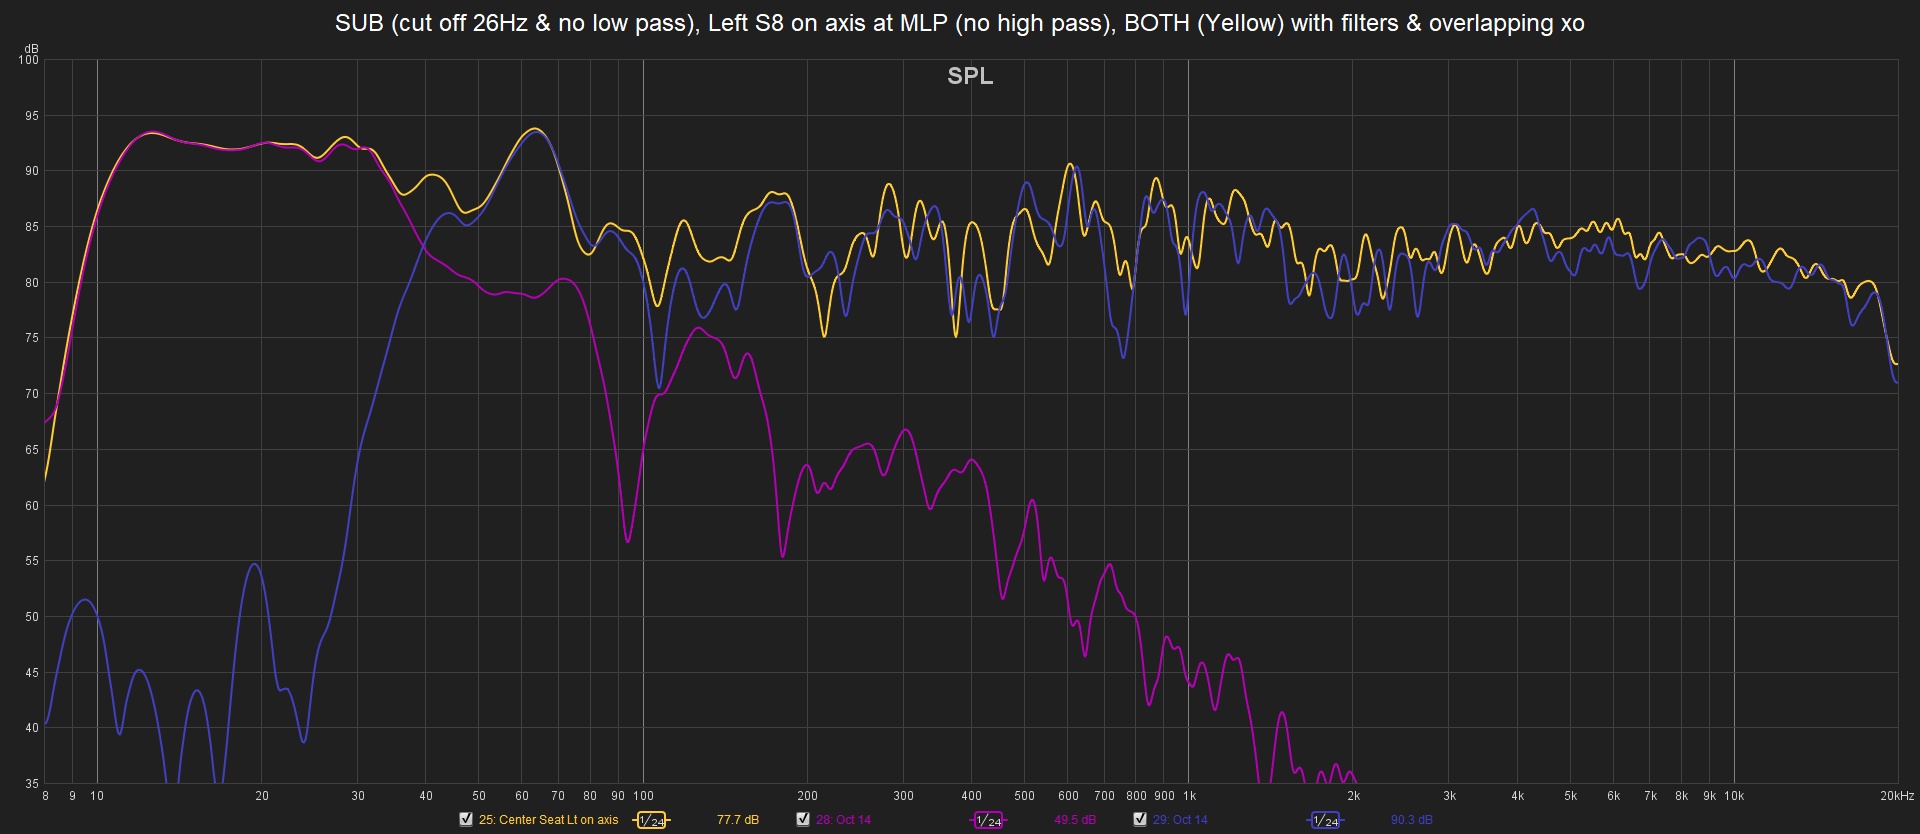 a) SUB (cut off 26Hz & no low pass), Left S8 on axis at MLP (no high pass), Both (Yellow) with...jpg